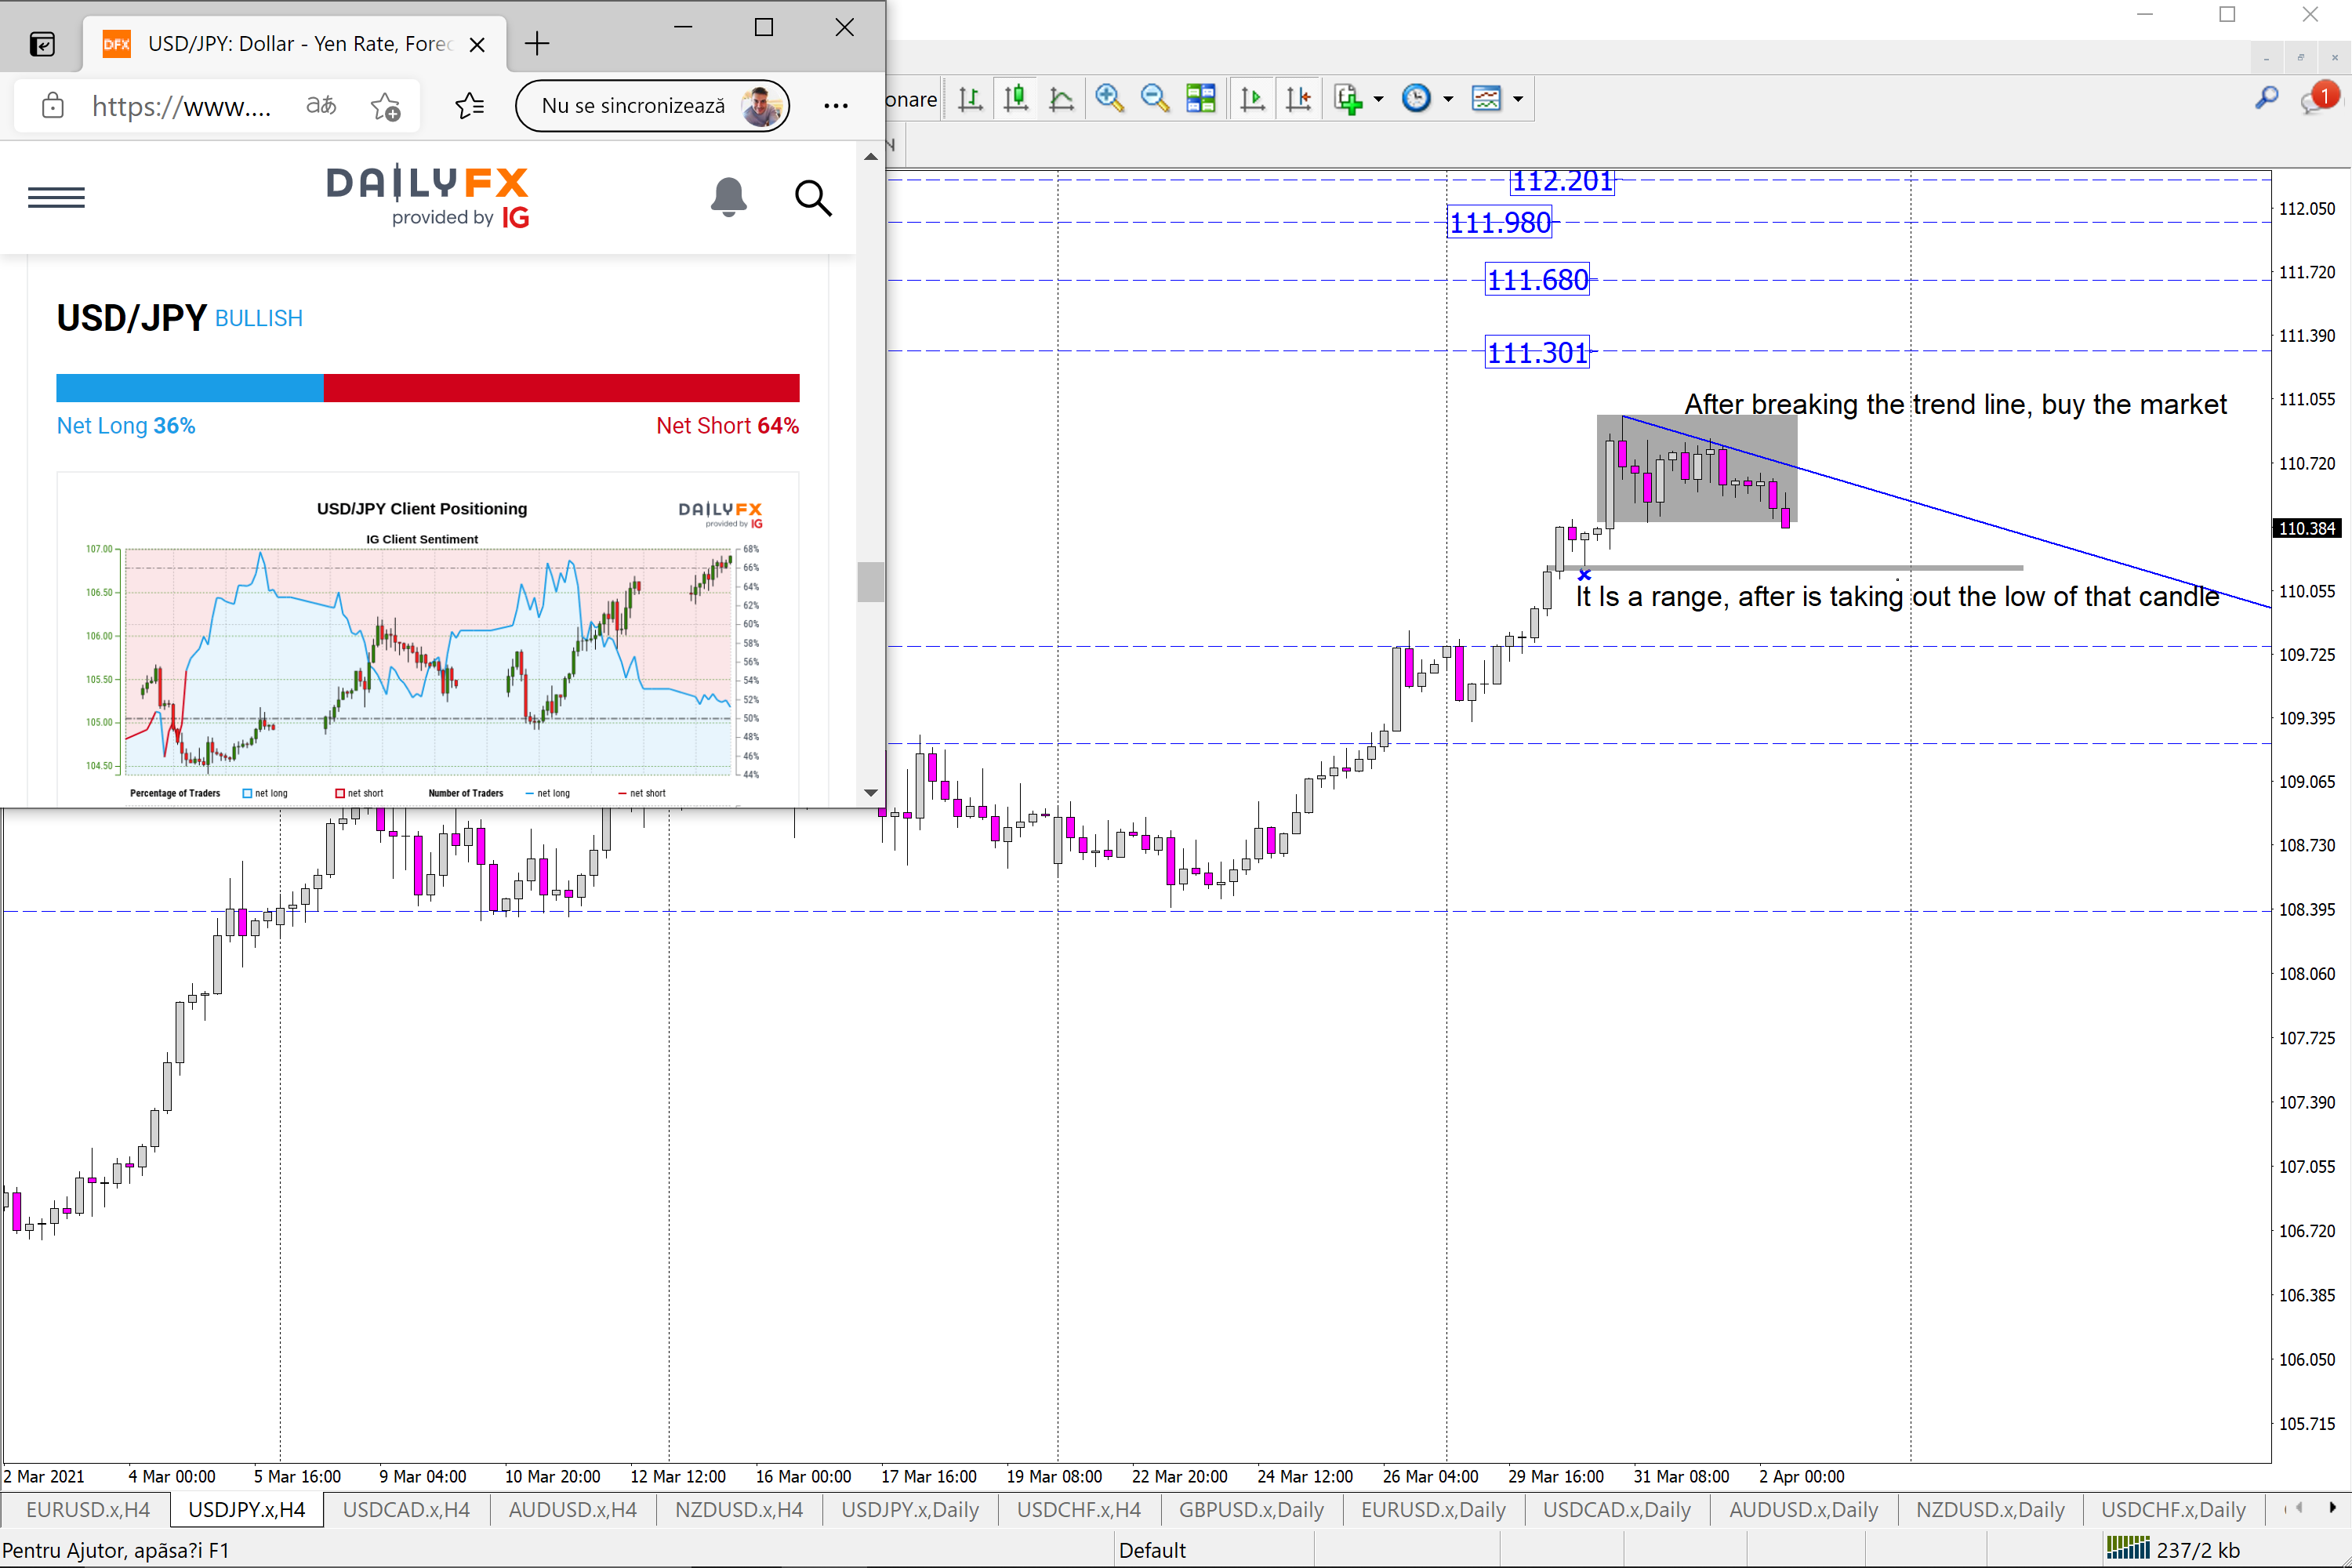 USD/JPY H4 Price action and liquidity of the market